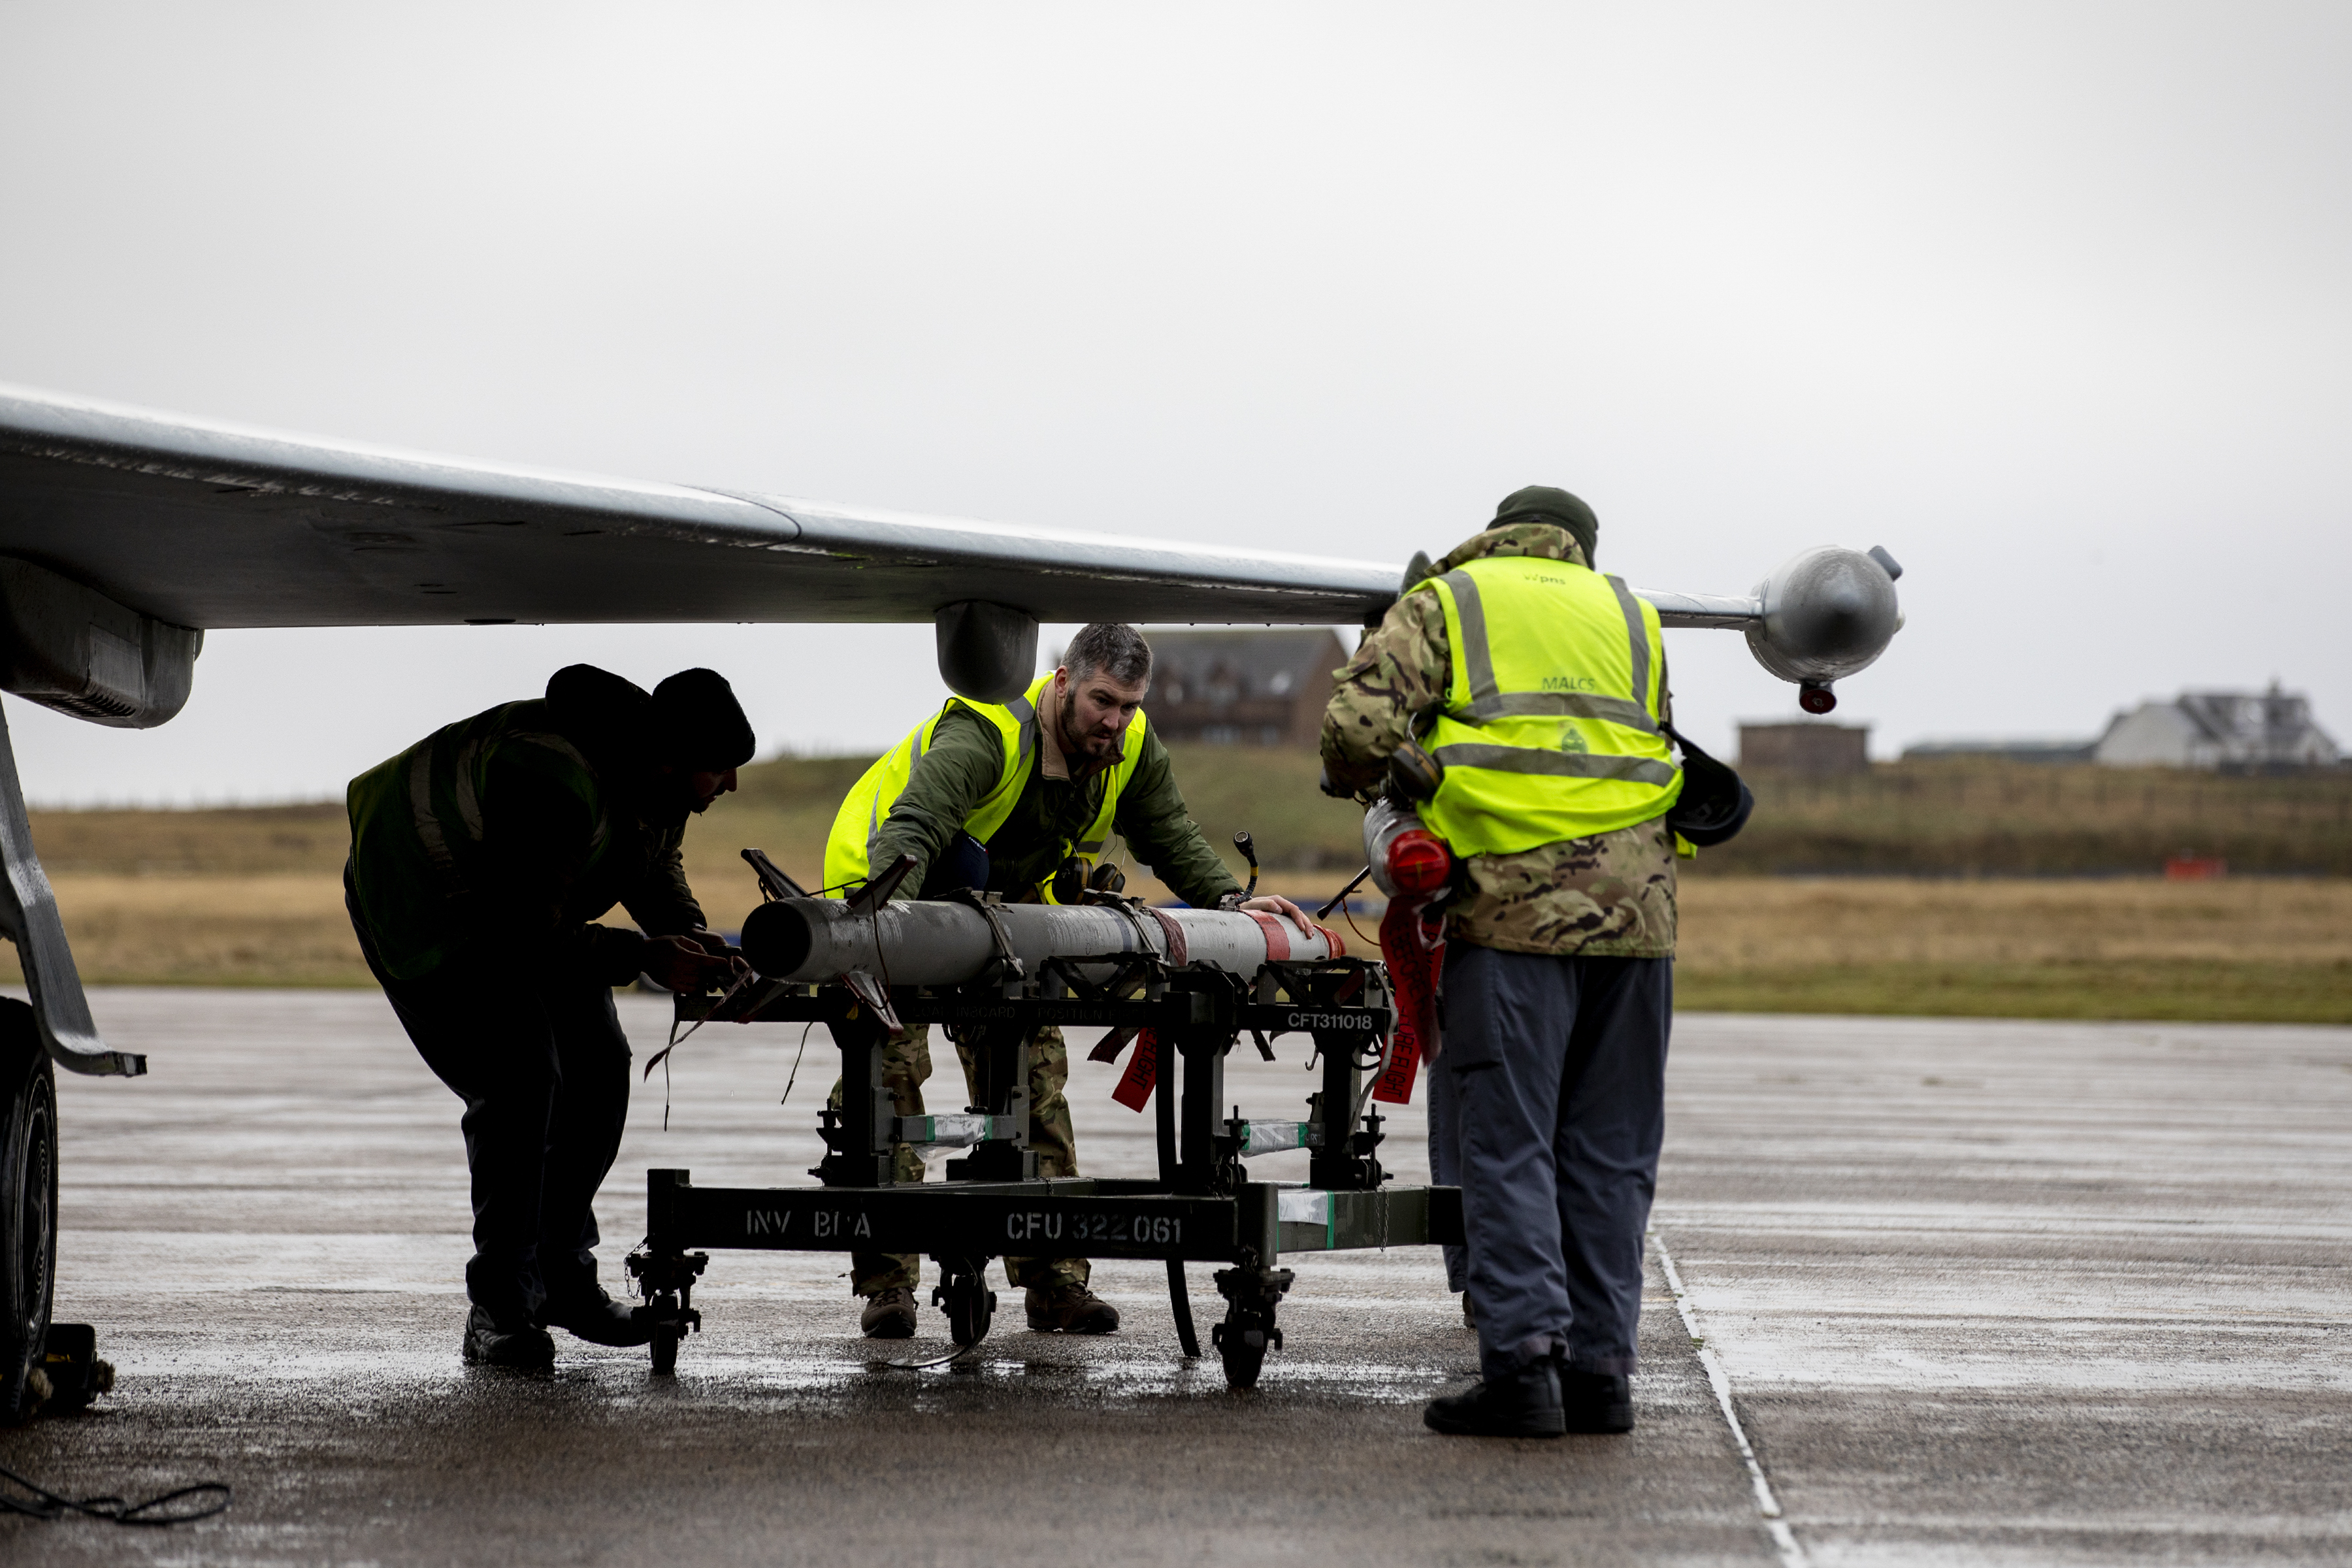 Personnel move missile under Typhoon wing, on the runway.